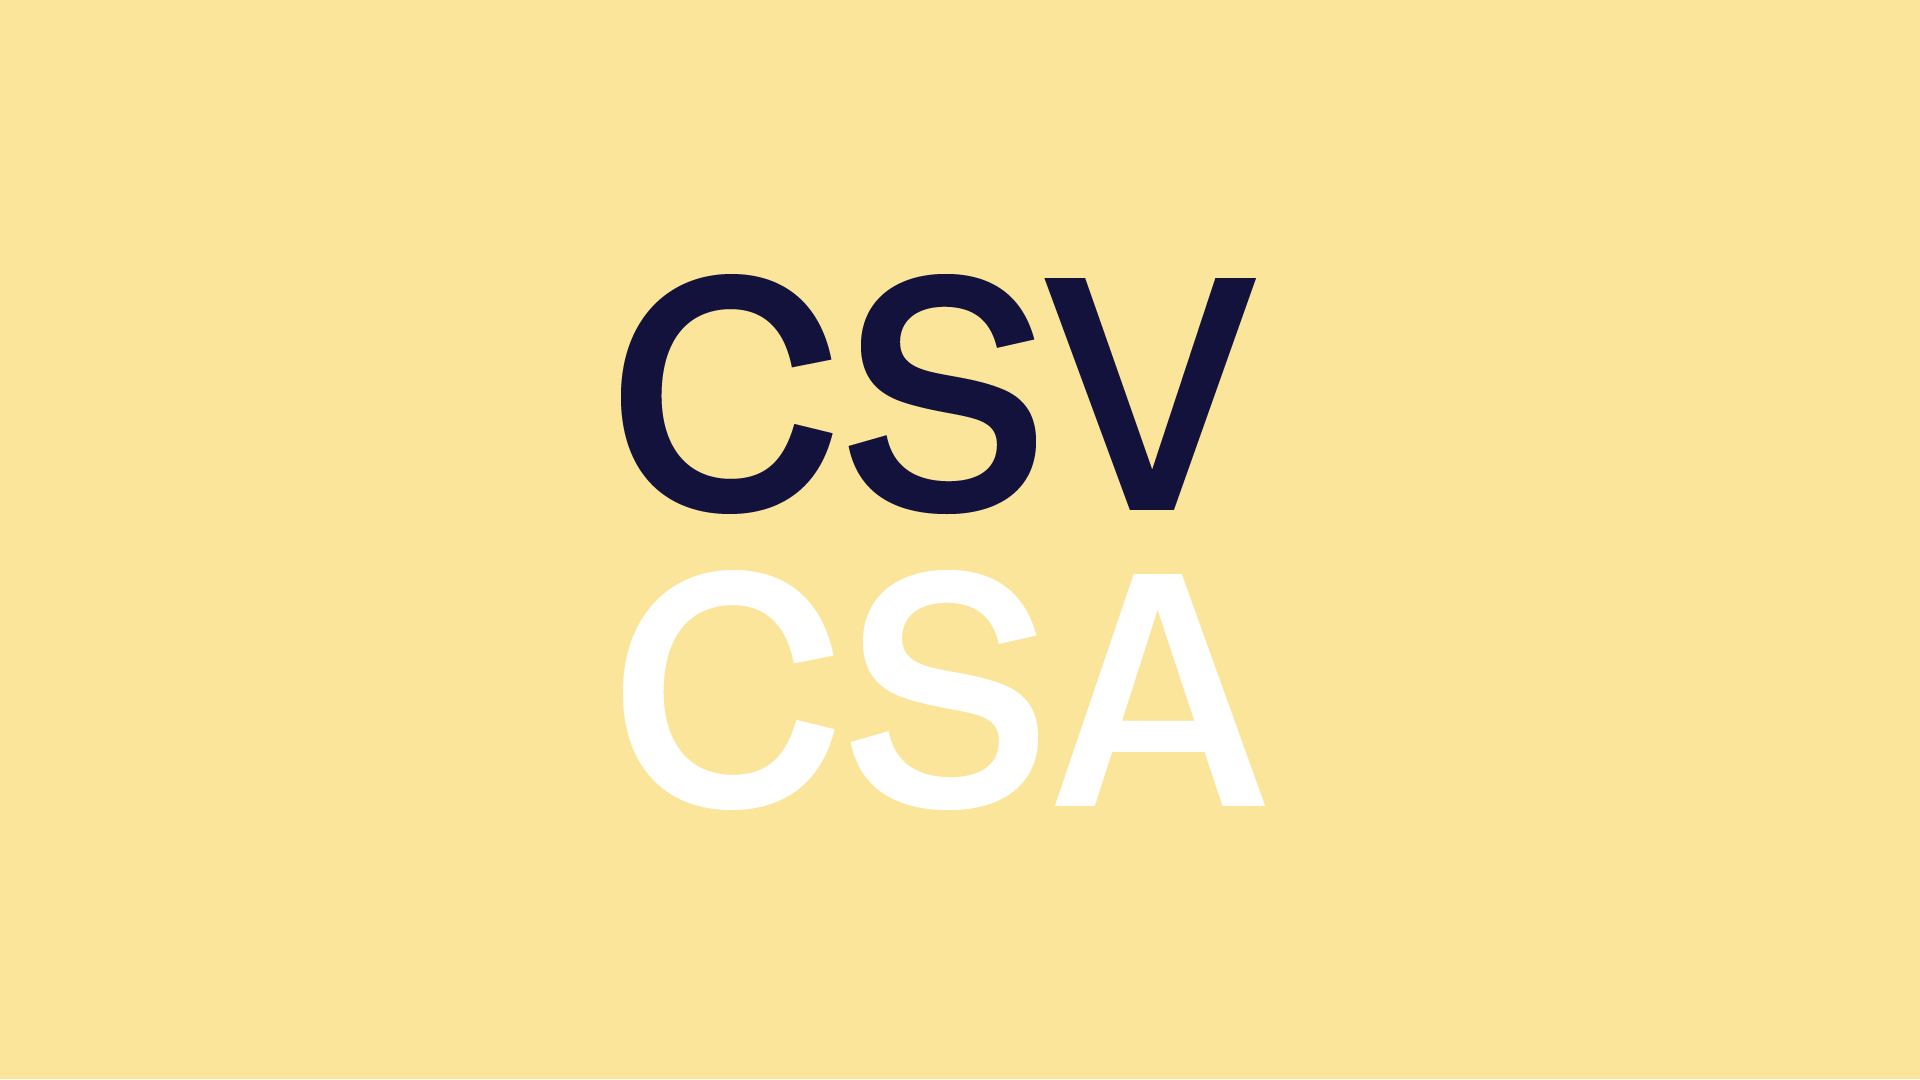 CSV vs. CSA: What Are the Main Differences?